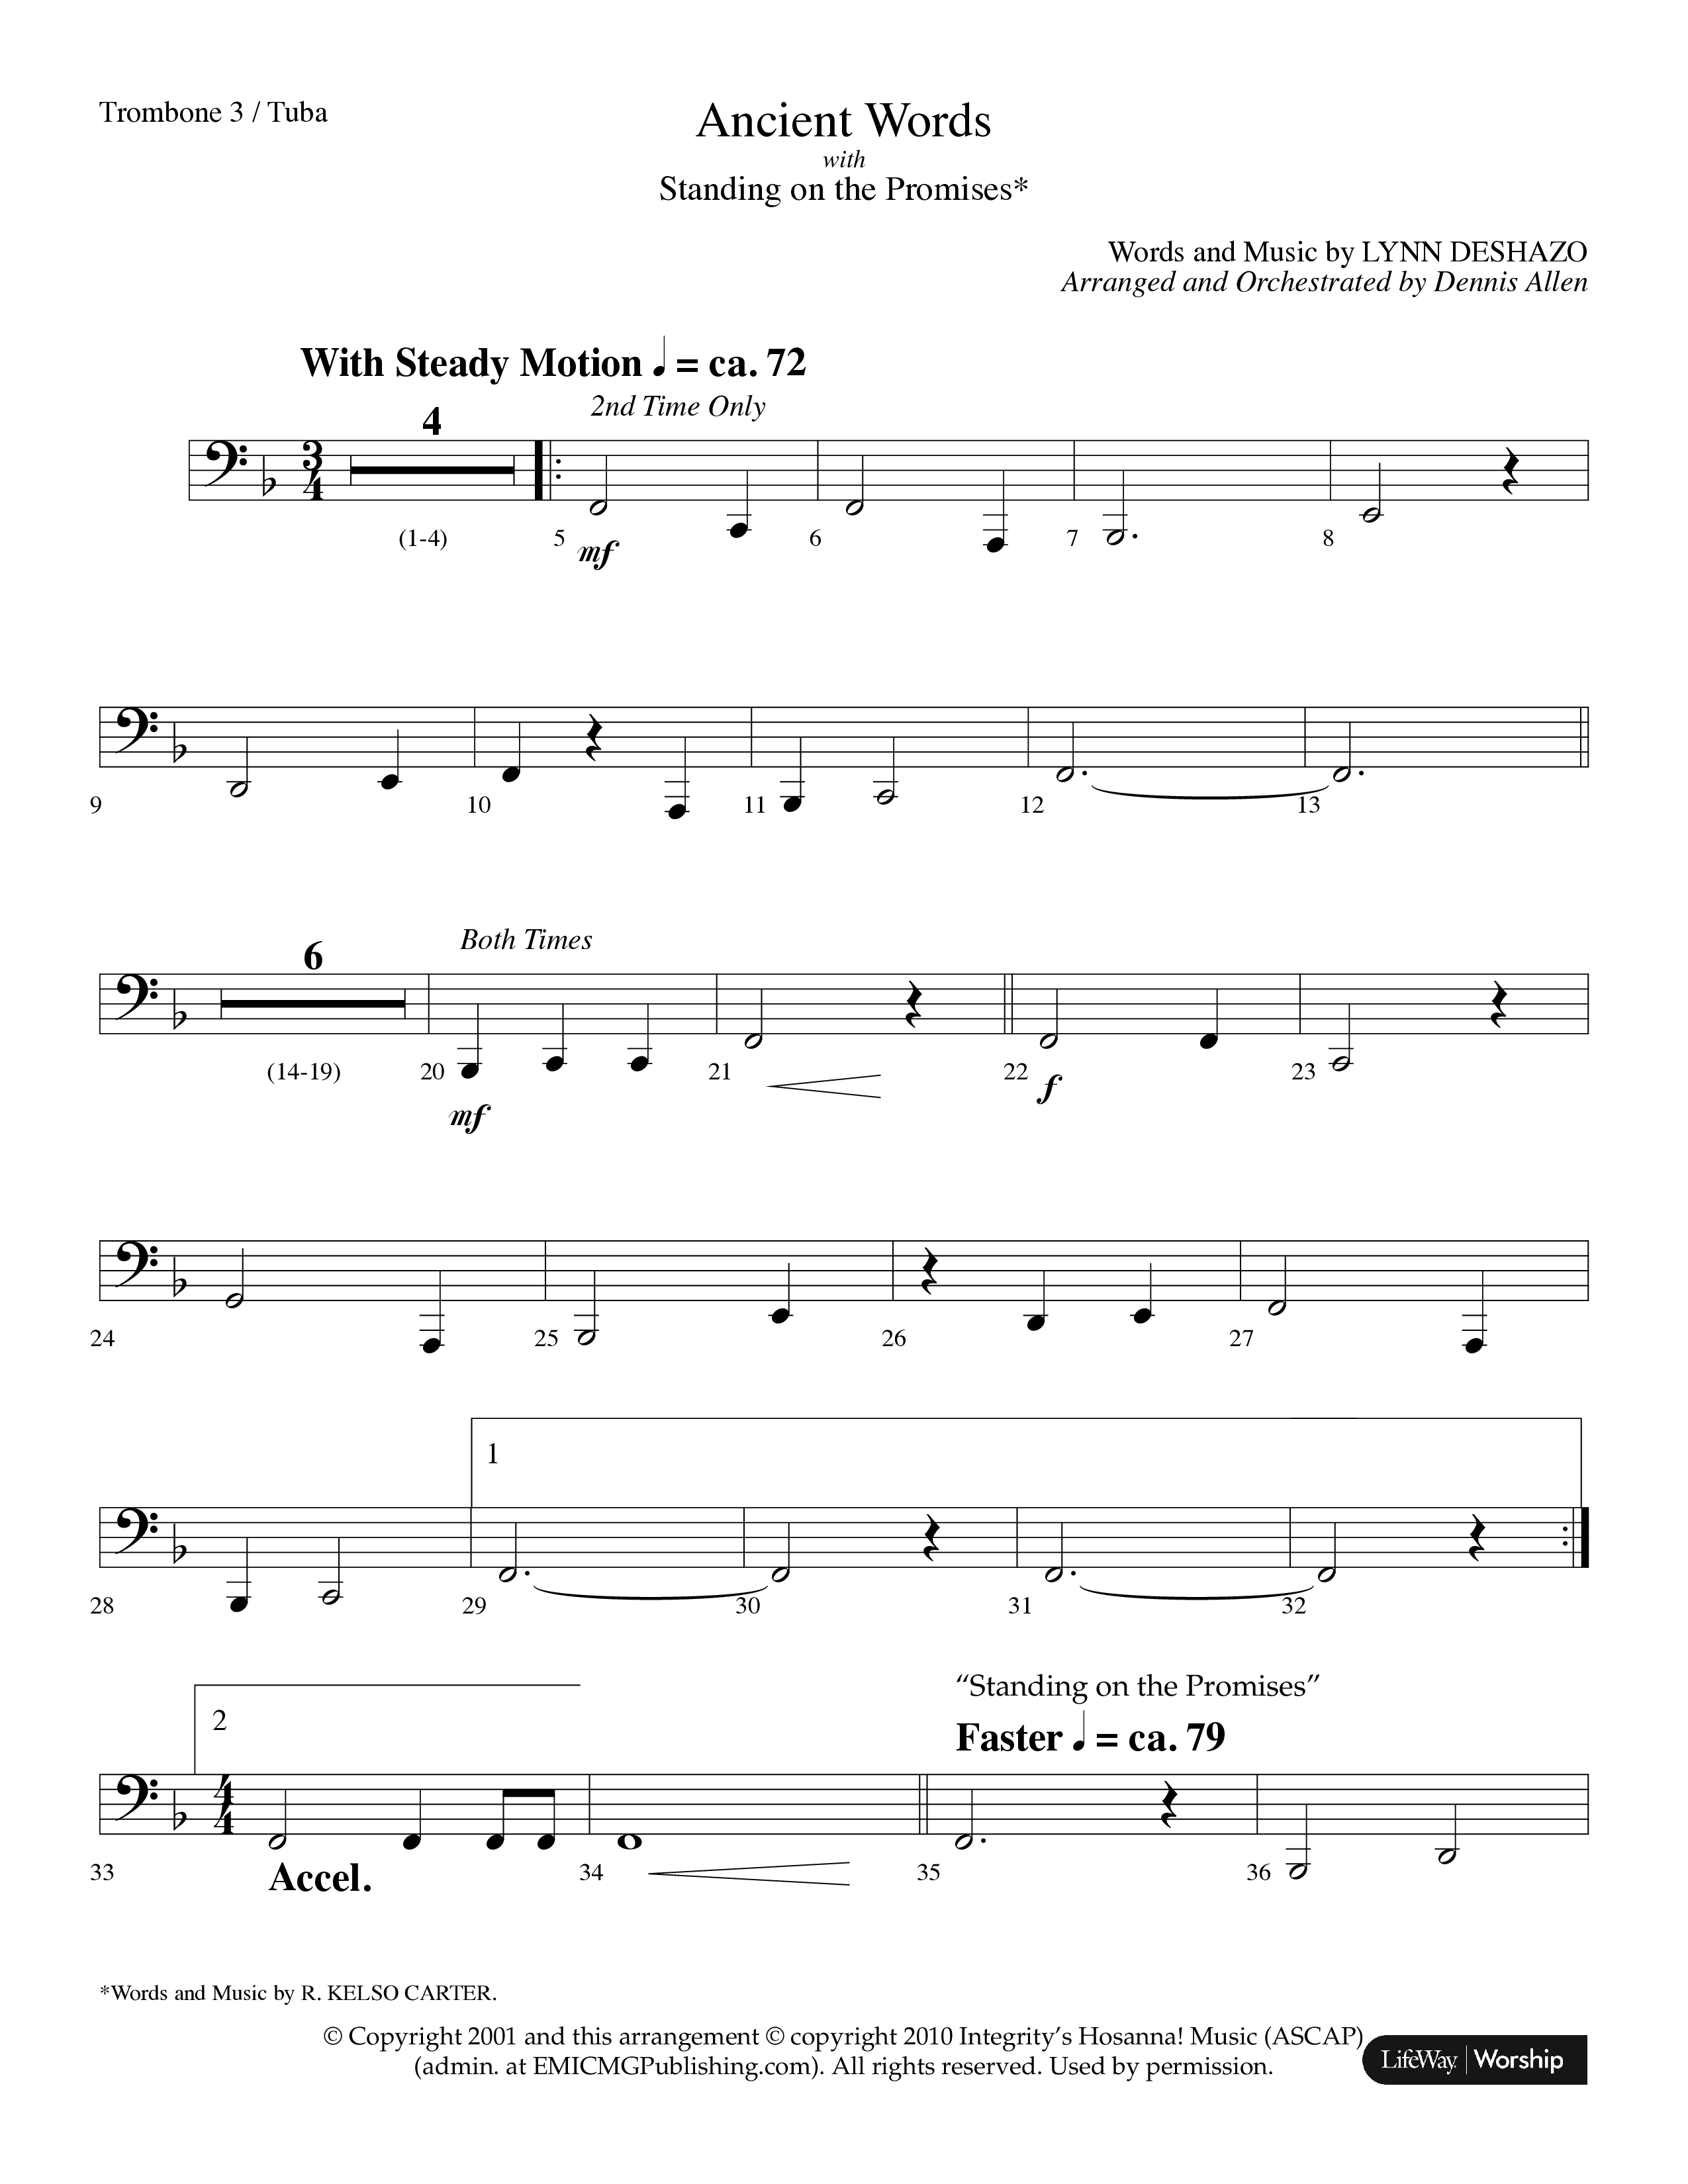 Ancient Words (with Standing On The Promises) (Choral Anthem SATB) Trombone 3/Tuba (Lifeway Choral / Arr. Dennis Allen)